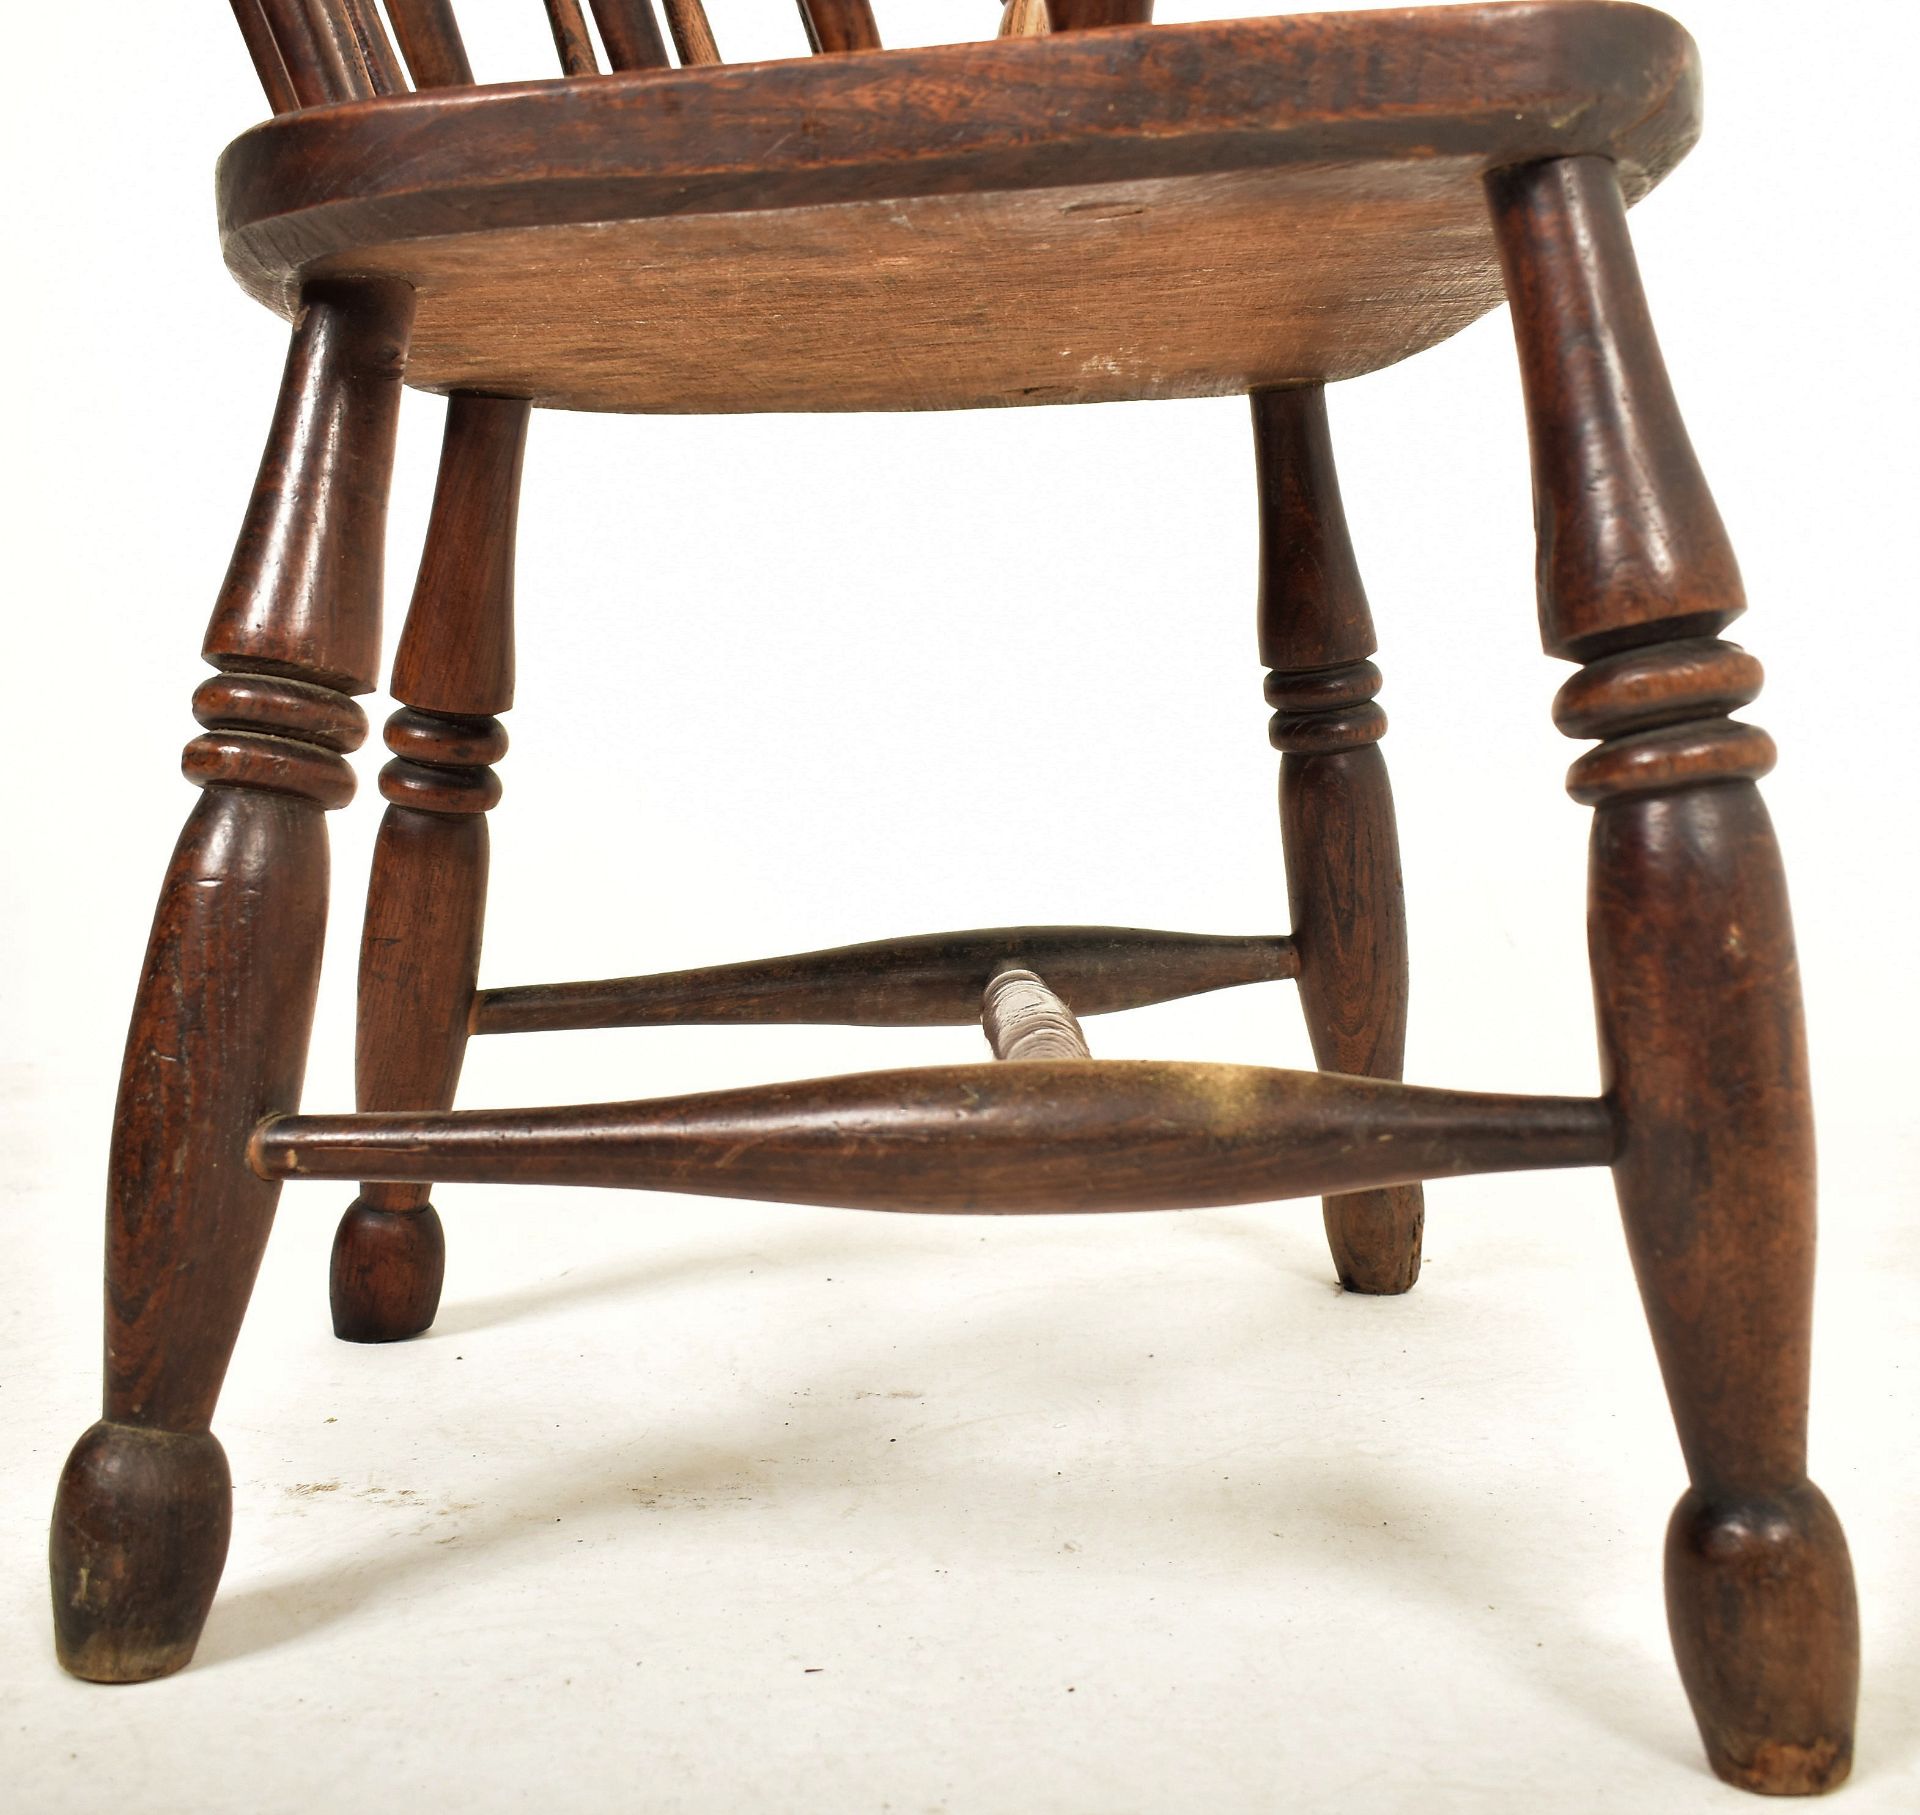 VICTORIAN 19TH CENTURY ELM COMB-BACK WINDSOR CHAIR - Image 3 of 5